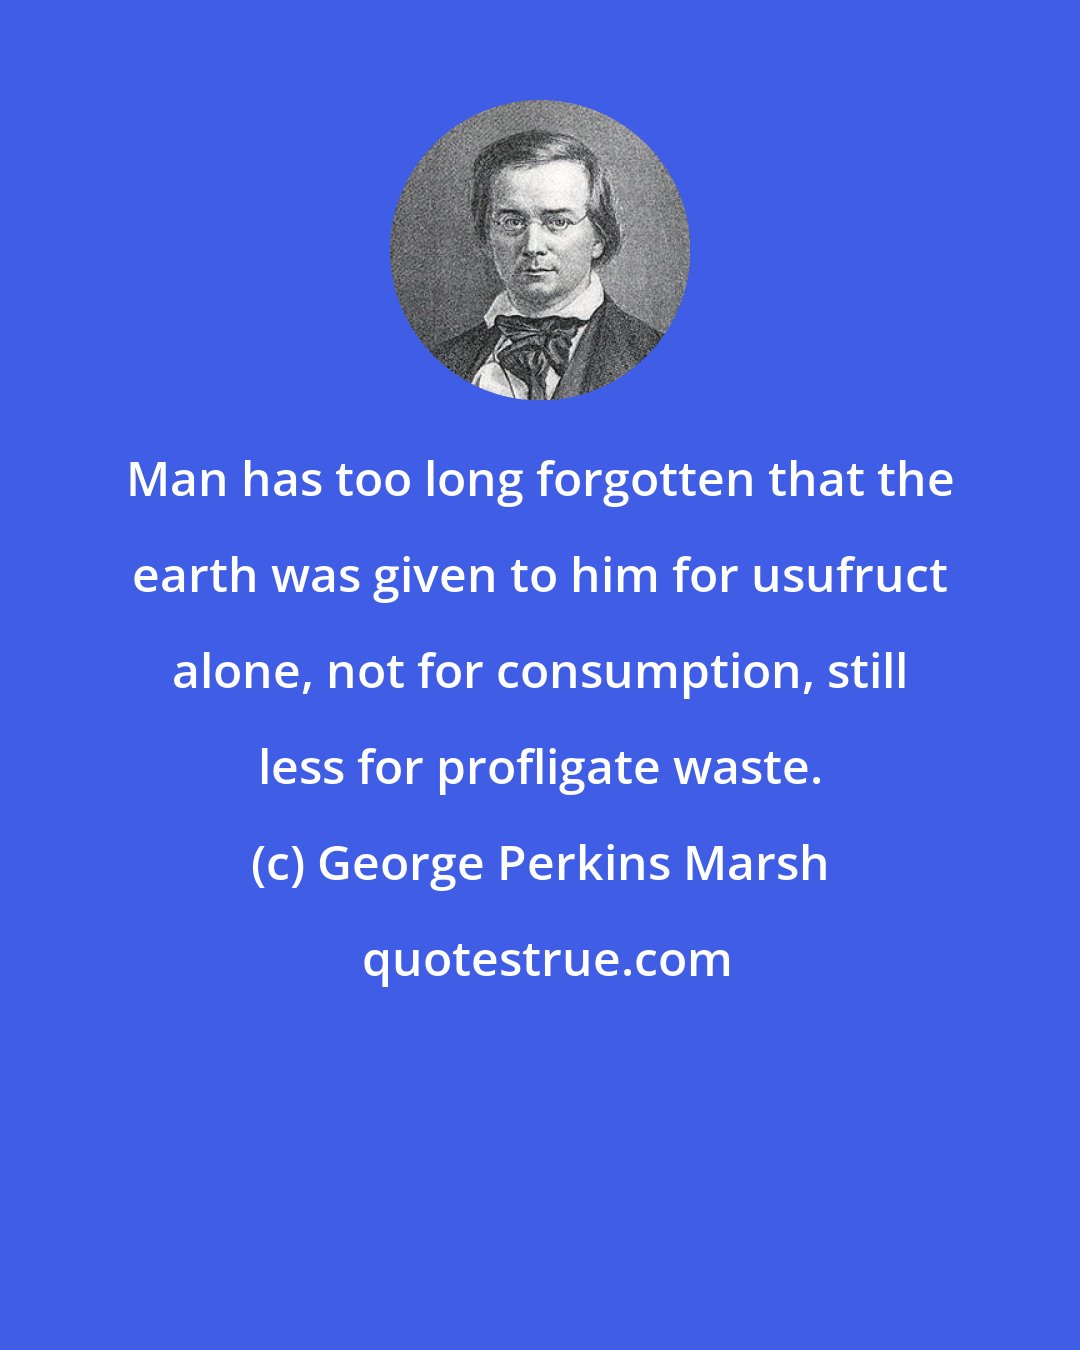 George Perkins Marsh: Man has too long forgotten that the earth was given to him for usufruct alone, not for consumption, still less for profligate waste.